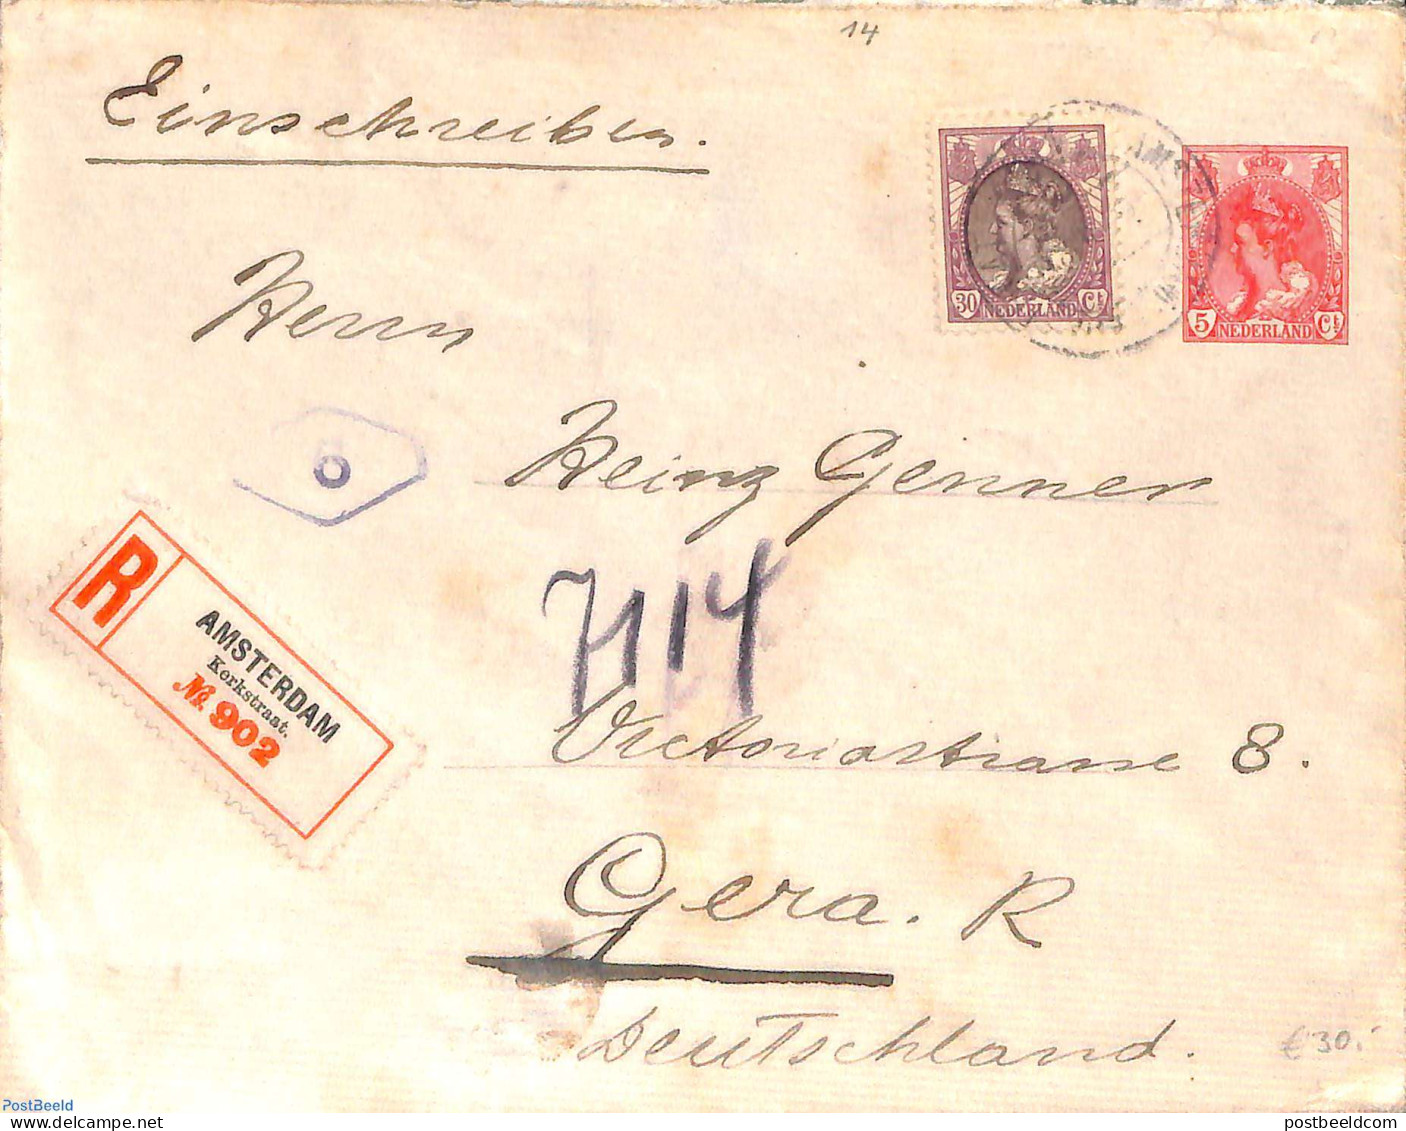 Netherlands 1919 Envelope 5c, Uprated To Registered Mail From Amsterdam To Gera (D), Used Postal Stationary - Brieven En Documenten